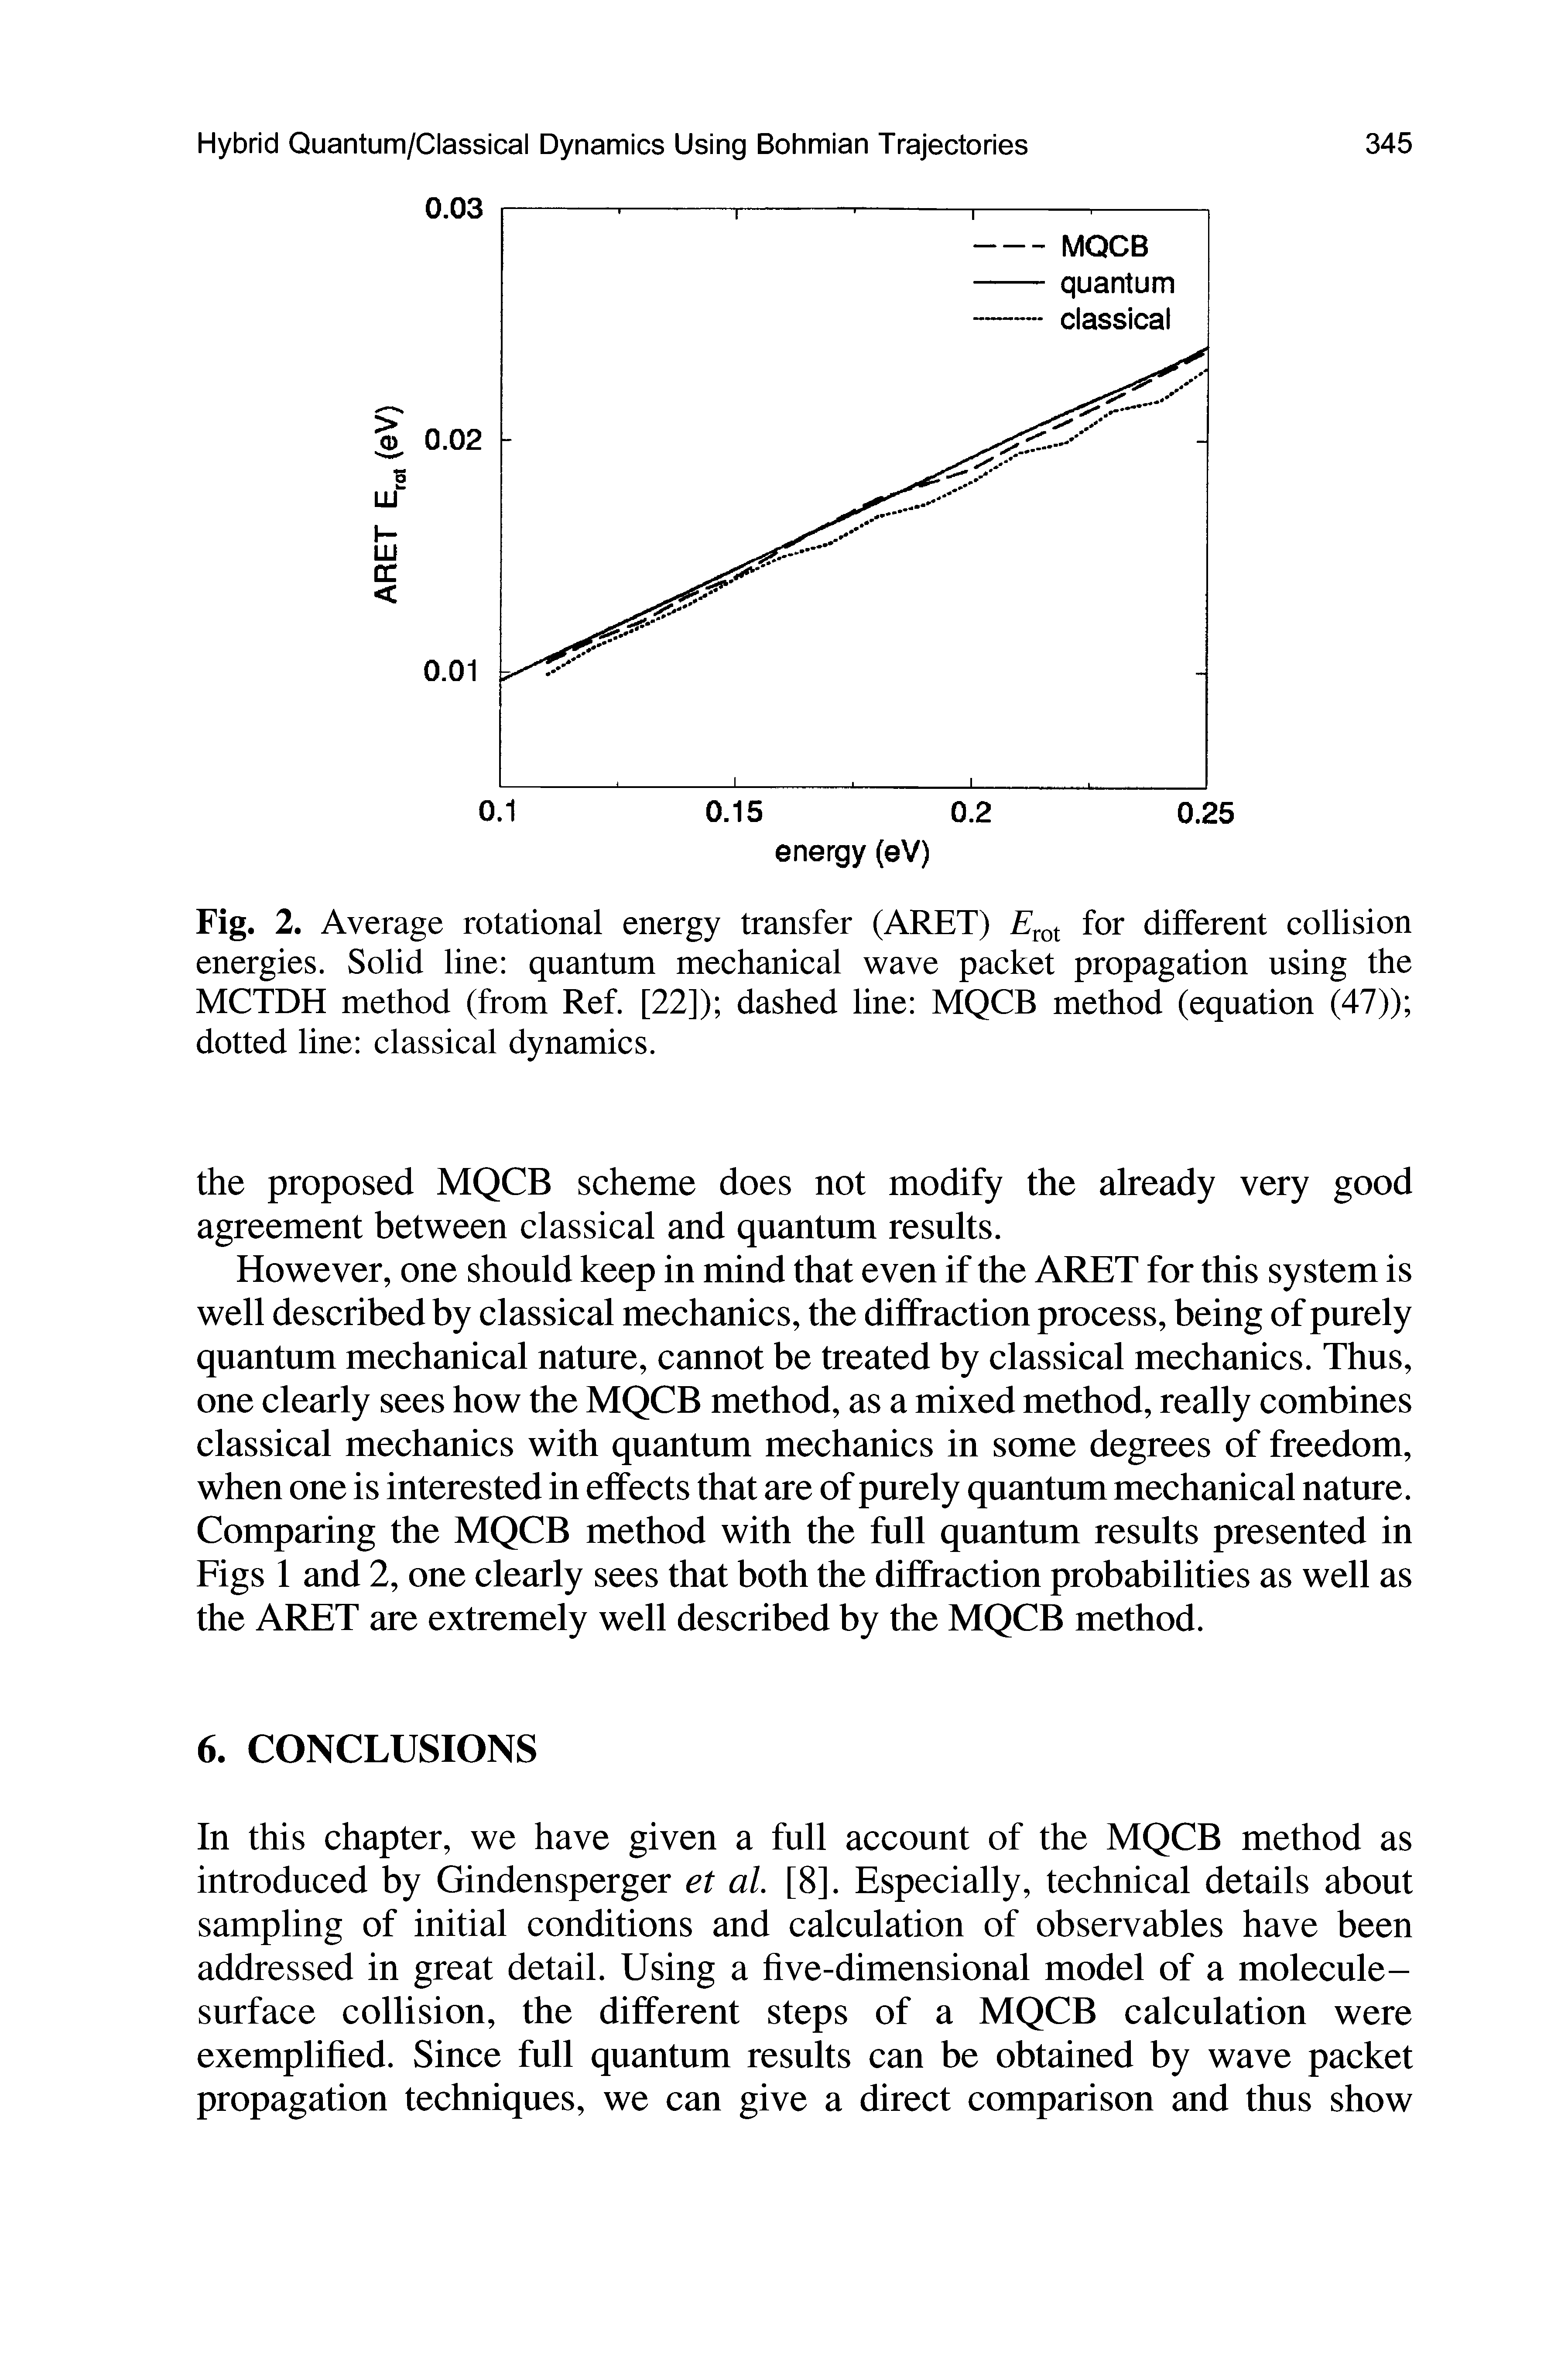 Fig. 2. Average rotational energy transfer (ARET) for different collision energies. Solid line quantum mechanical wave packet propagation using the MCTDH method (from Ref. [22]) dashed line MQCB method (equation (47)) dotted line classical dynamics.